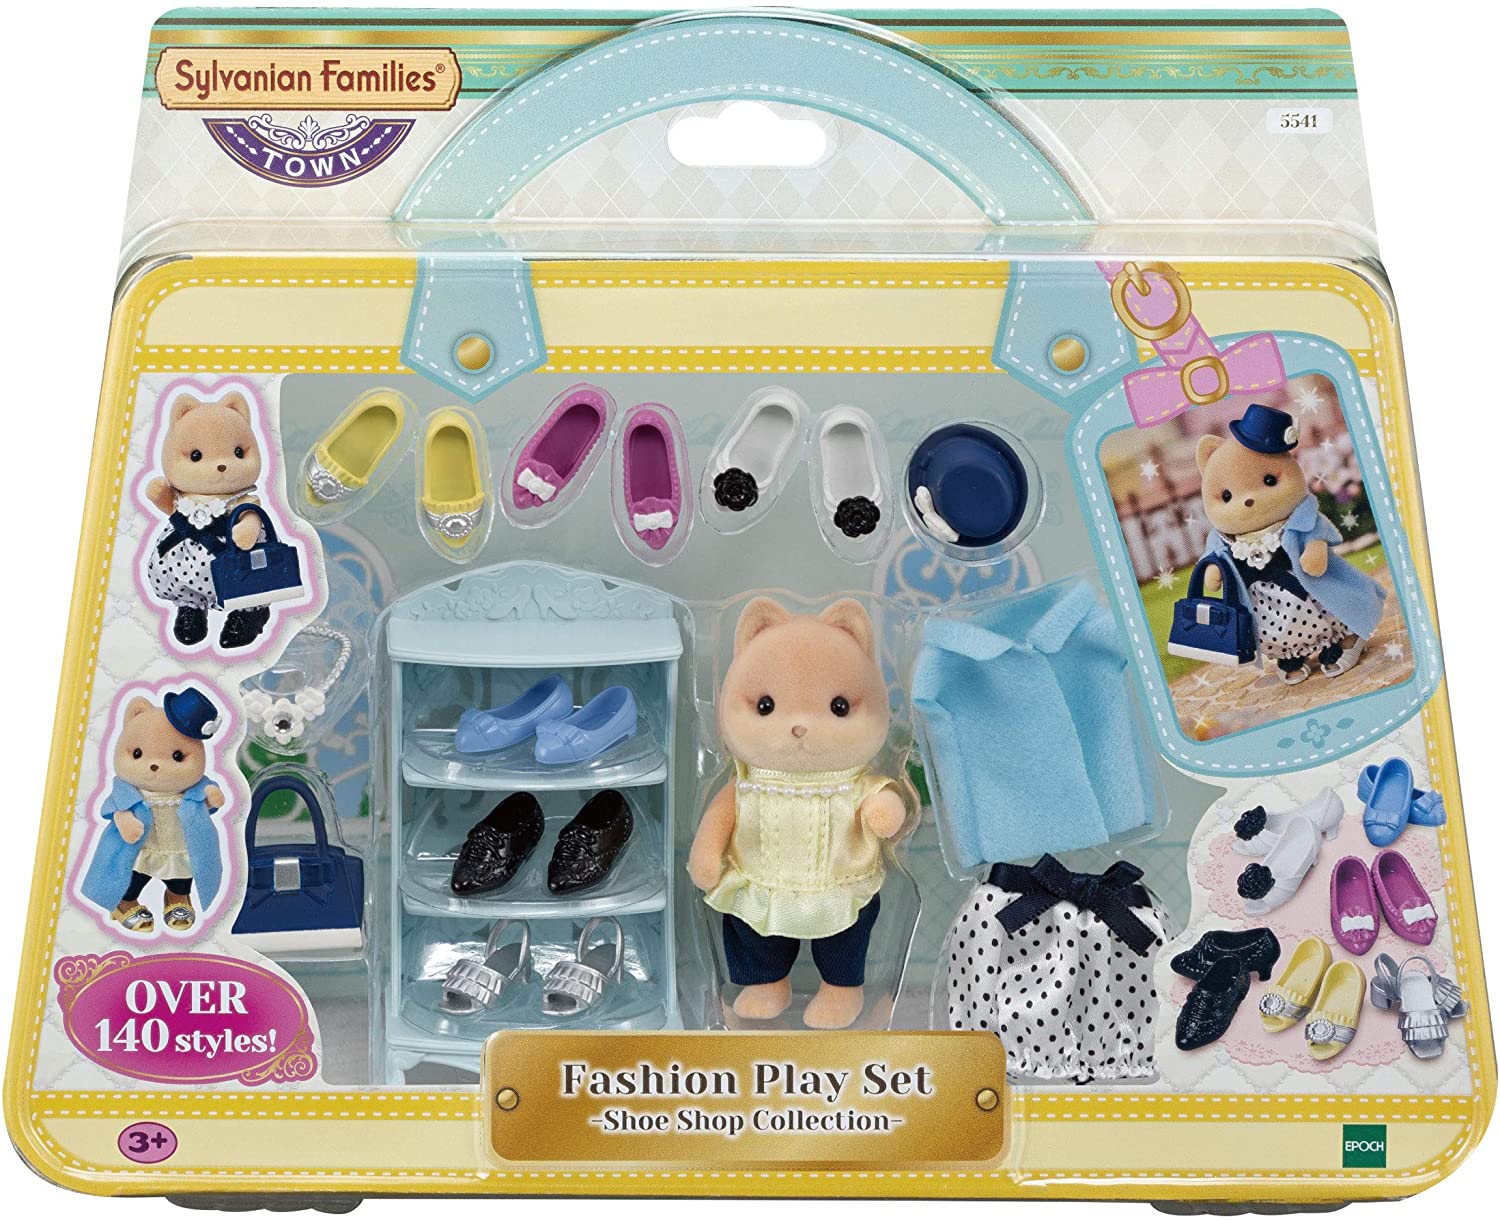 New Calico Critters Sylvanian Families sets House, family, toy and Shoe Shop, more! Spooky Surprise Cat family Panda Midnight 2021